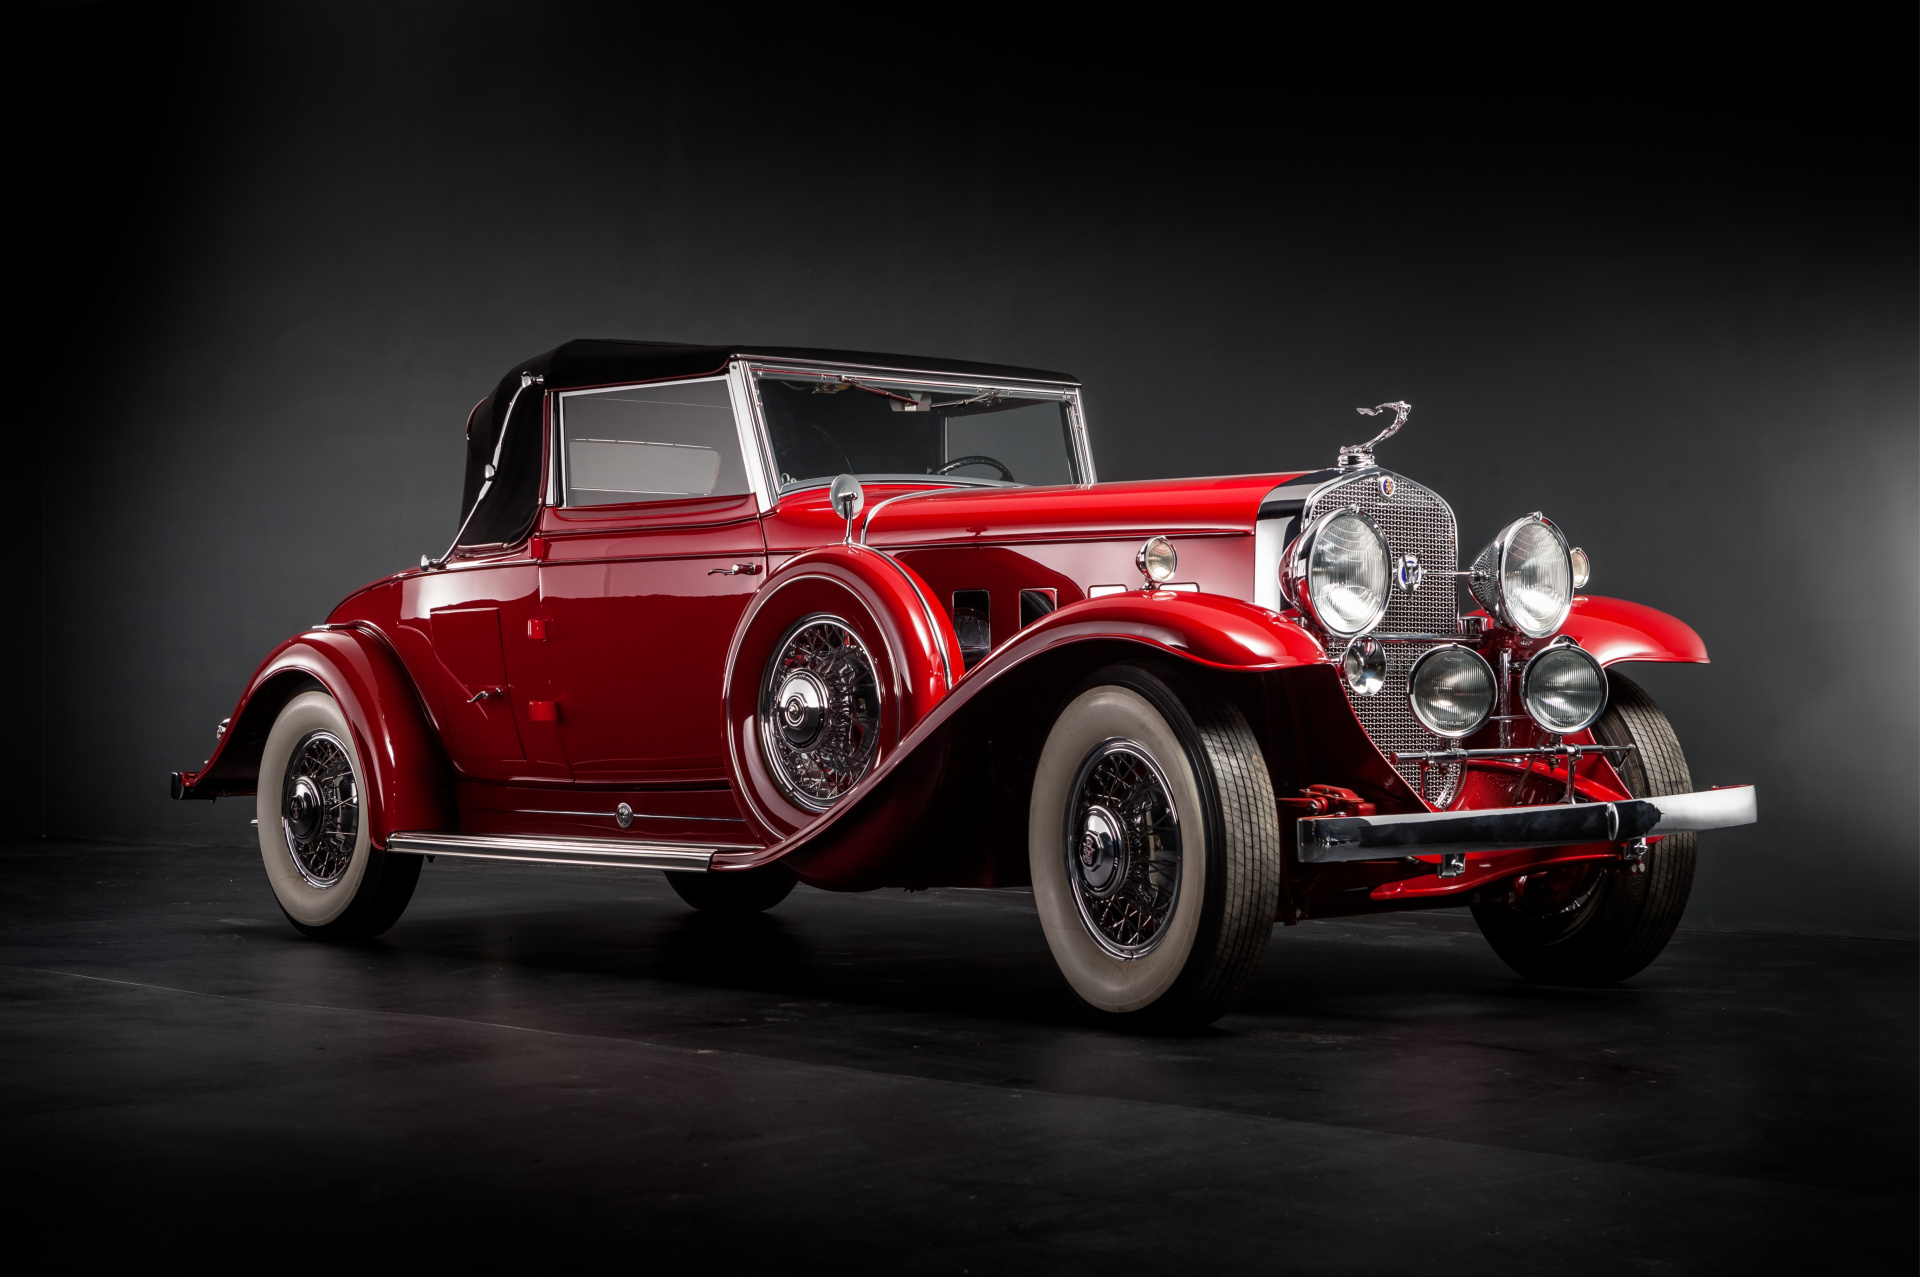 American cars from 1920s to 1930s